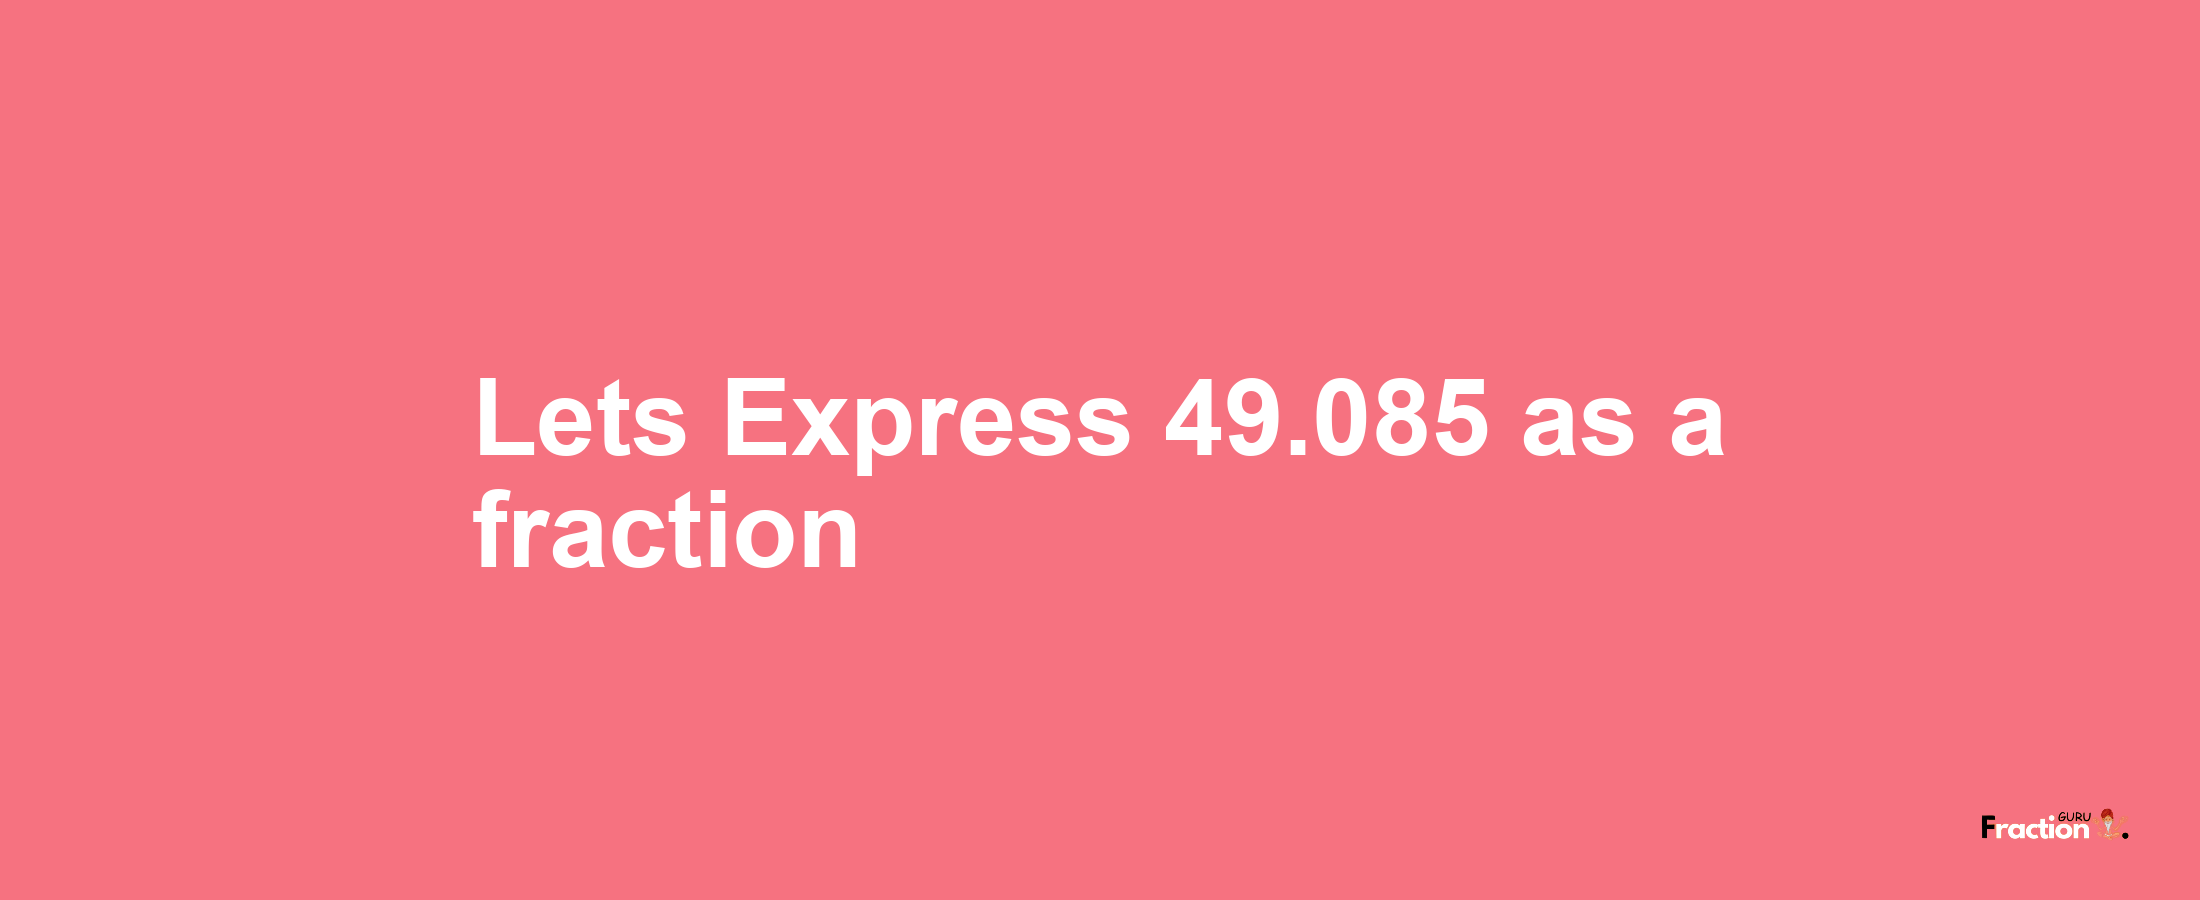 Lets Express 49.085 as afraction